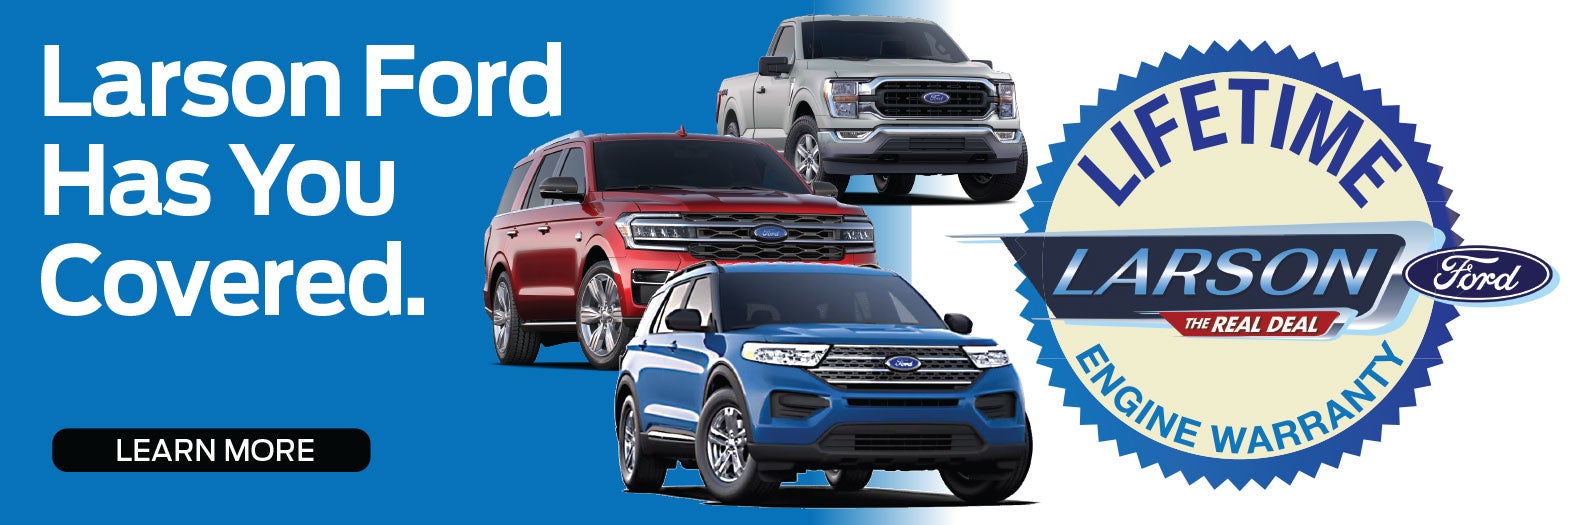 Larson Ford Has You Covered